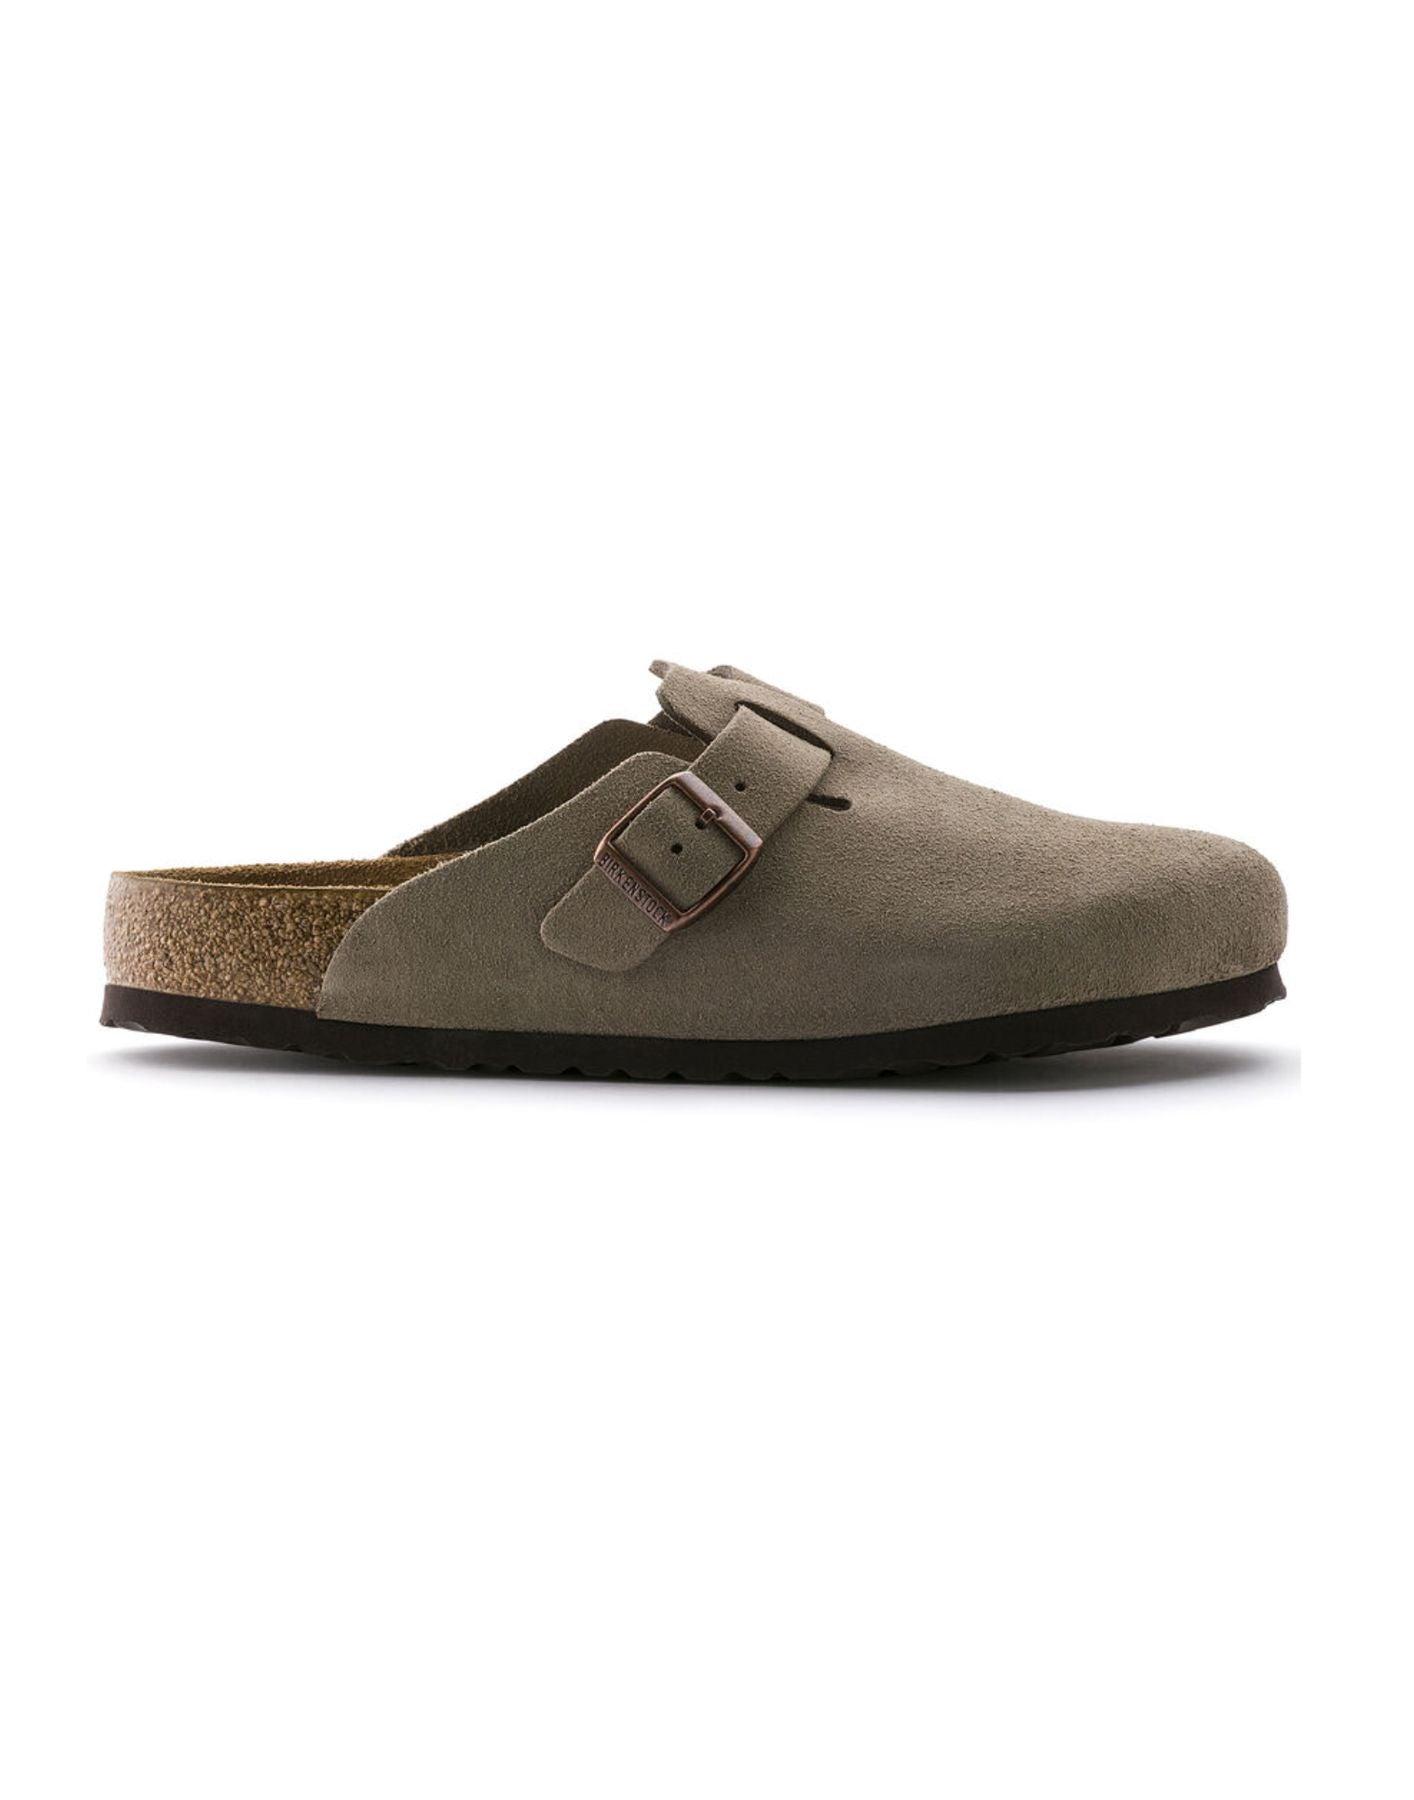 Chaussures pour l'homme 0560773 M Taupe Boston Birkenstock